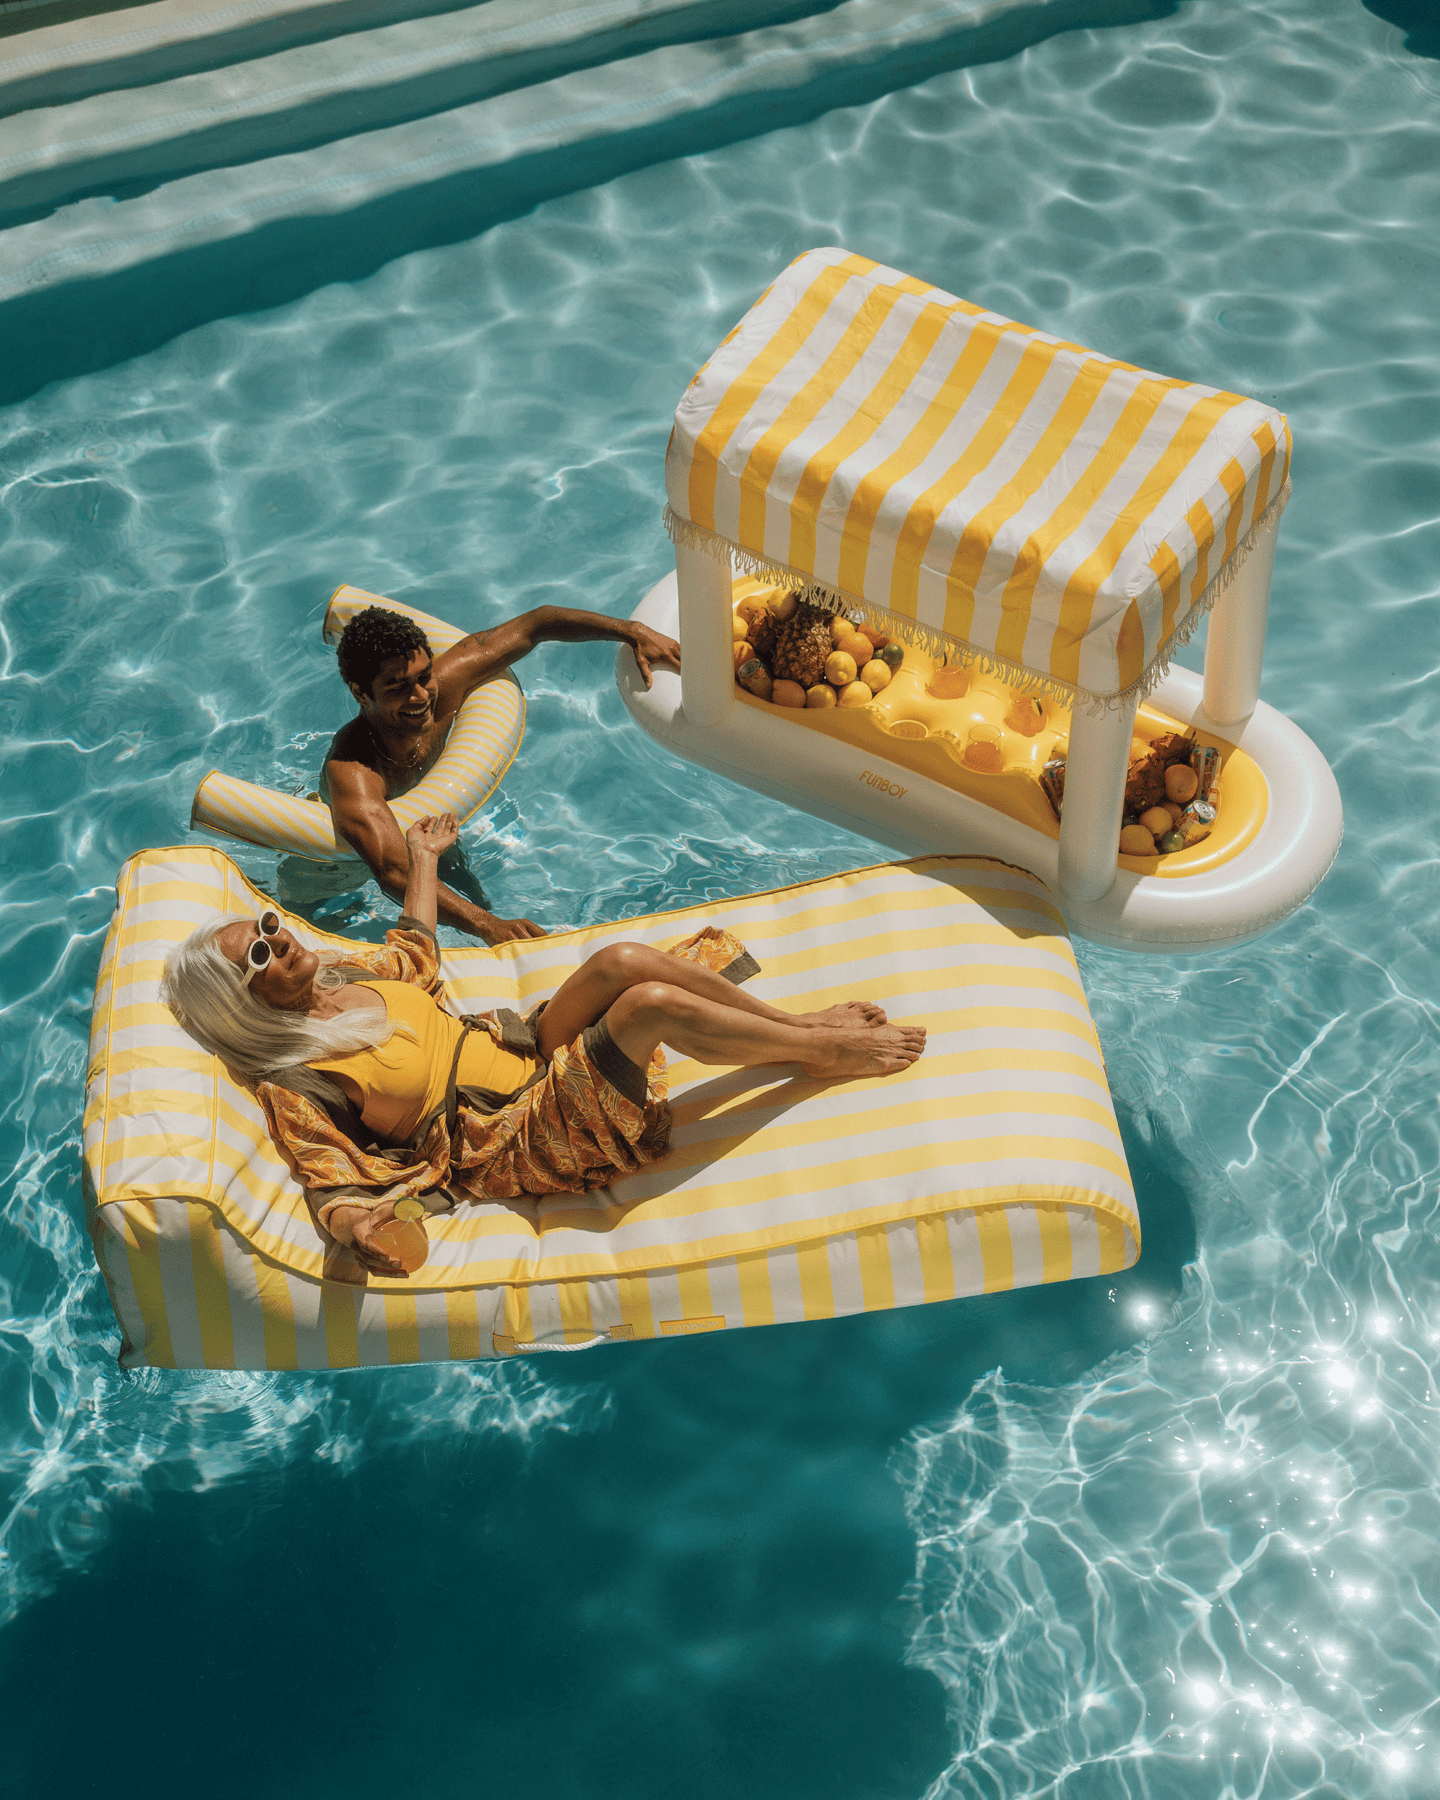 Fabric Colored Pool Float - Yellow Cabana Stripe Lounger